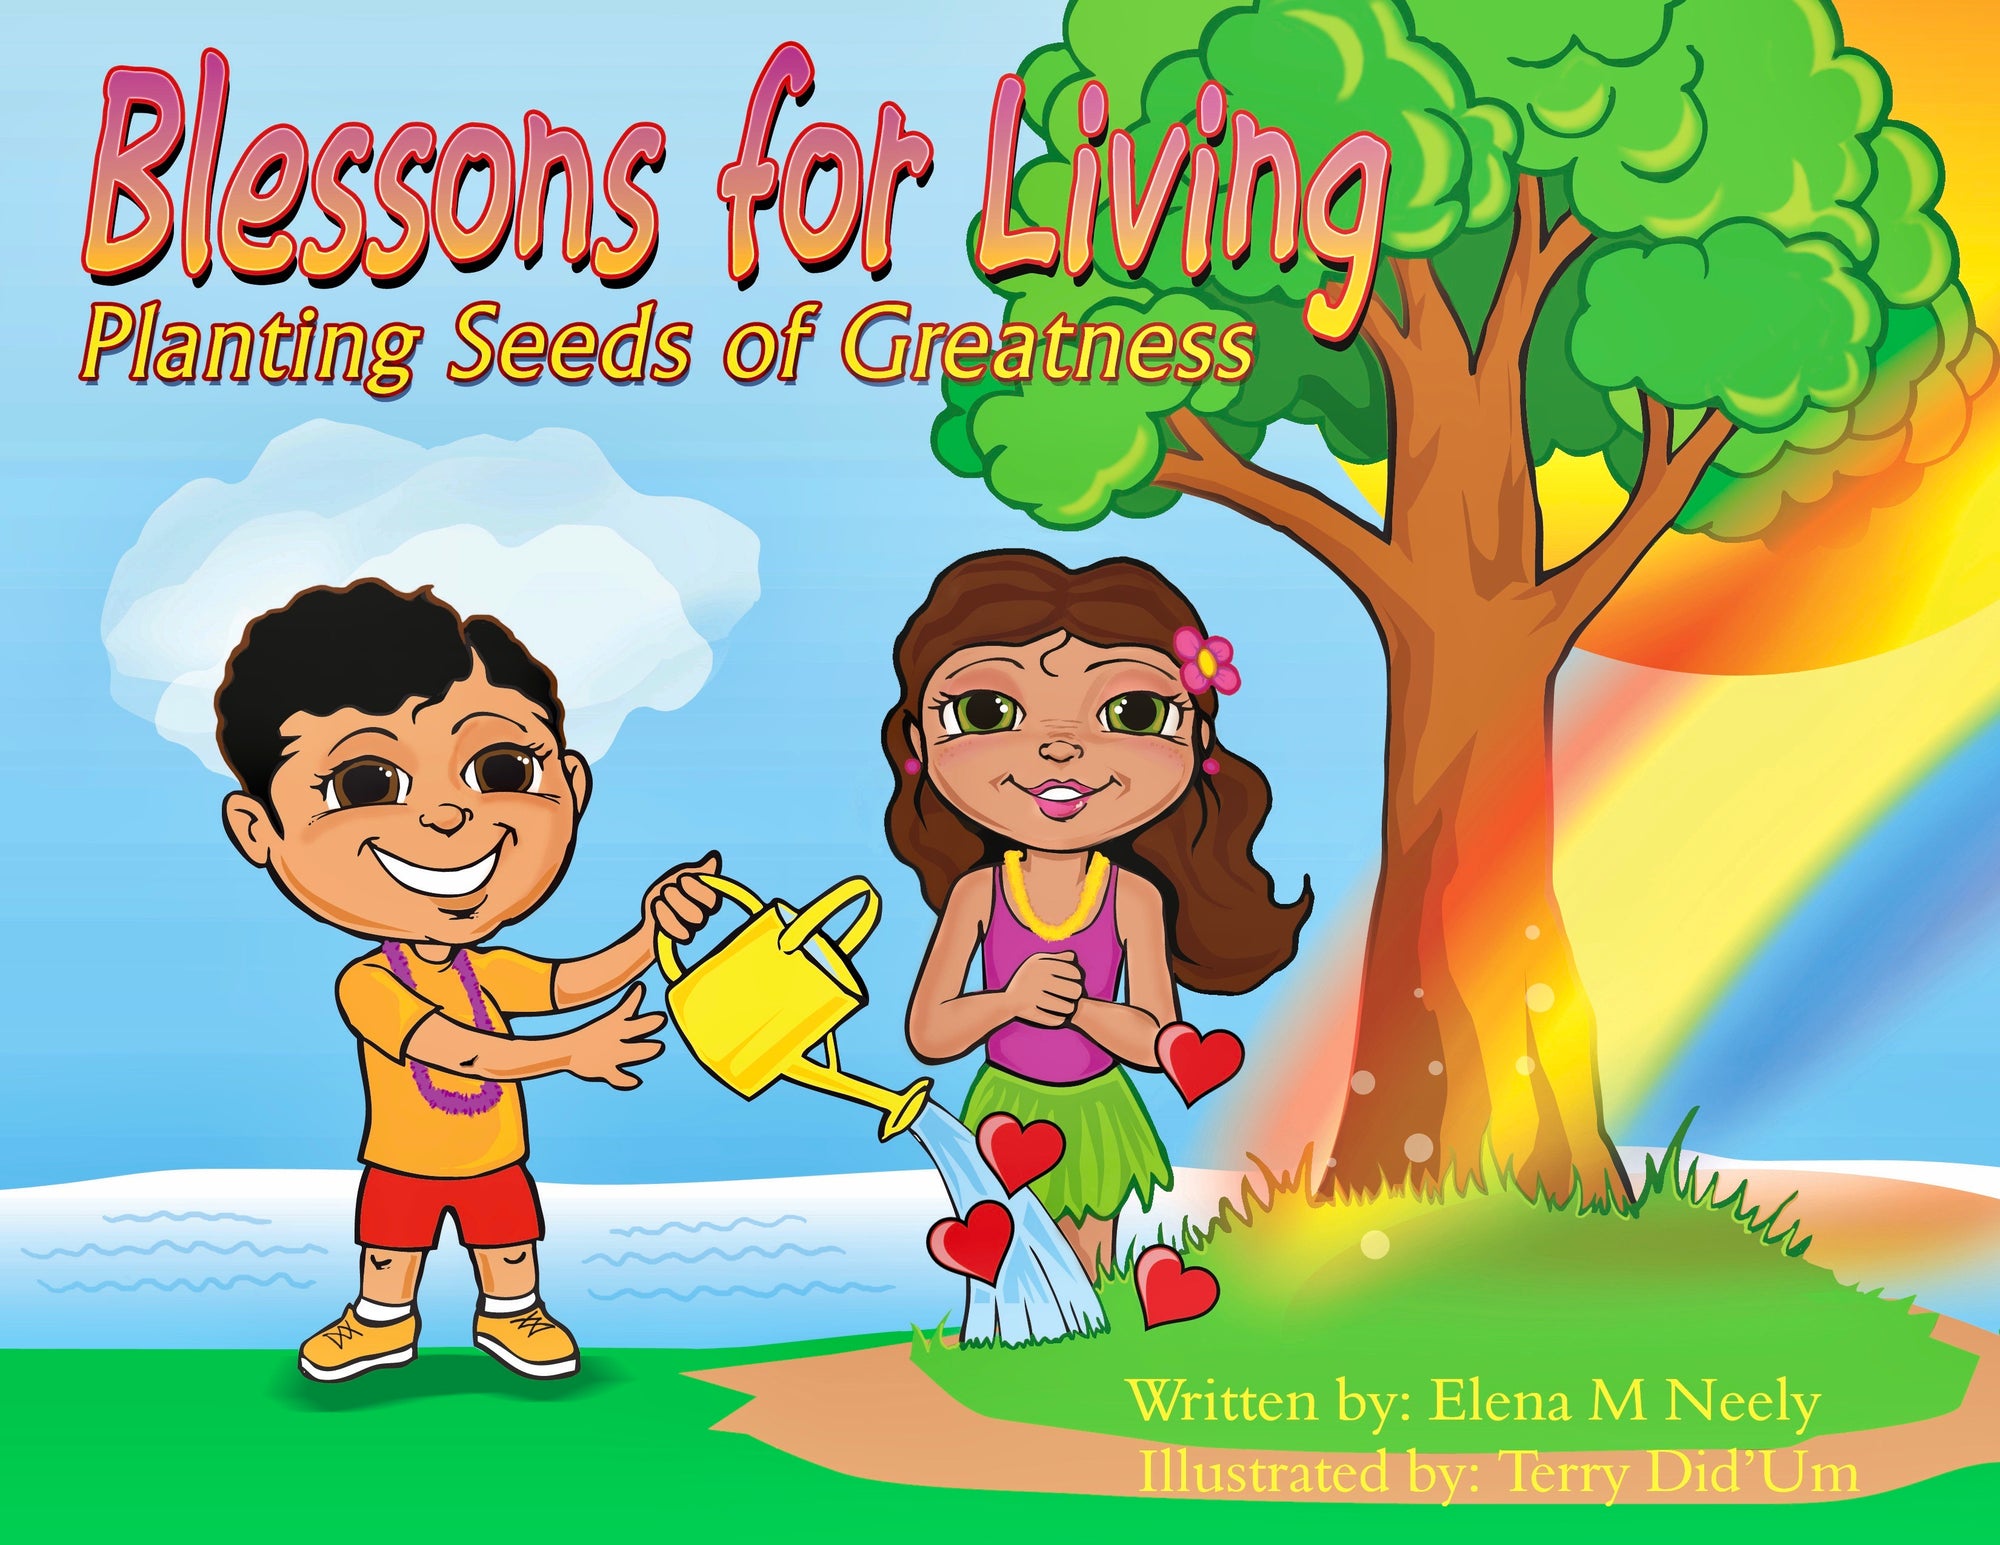 Blessons for Living: Planting Seeds of Greatness